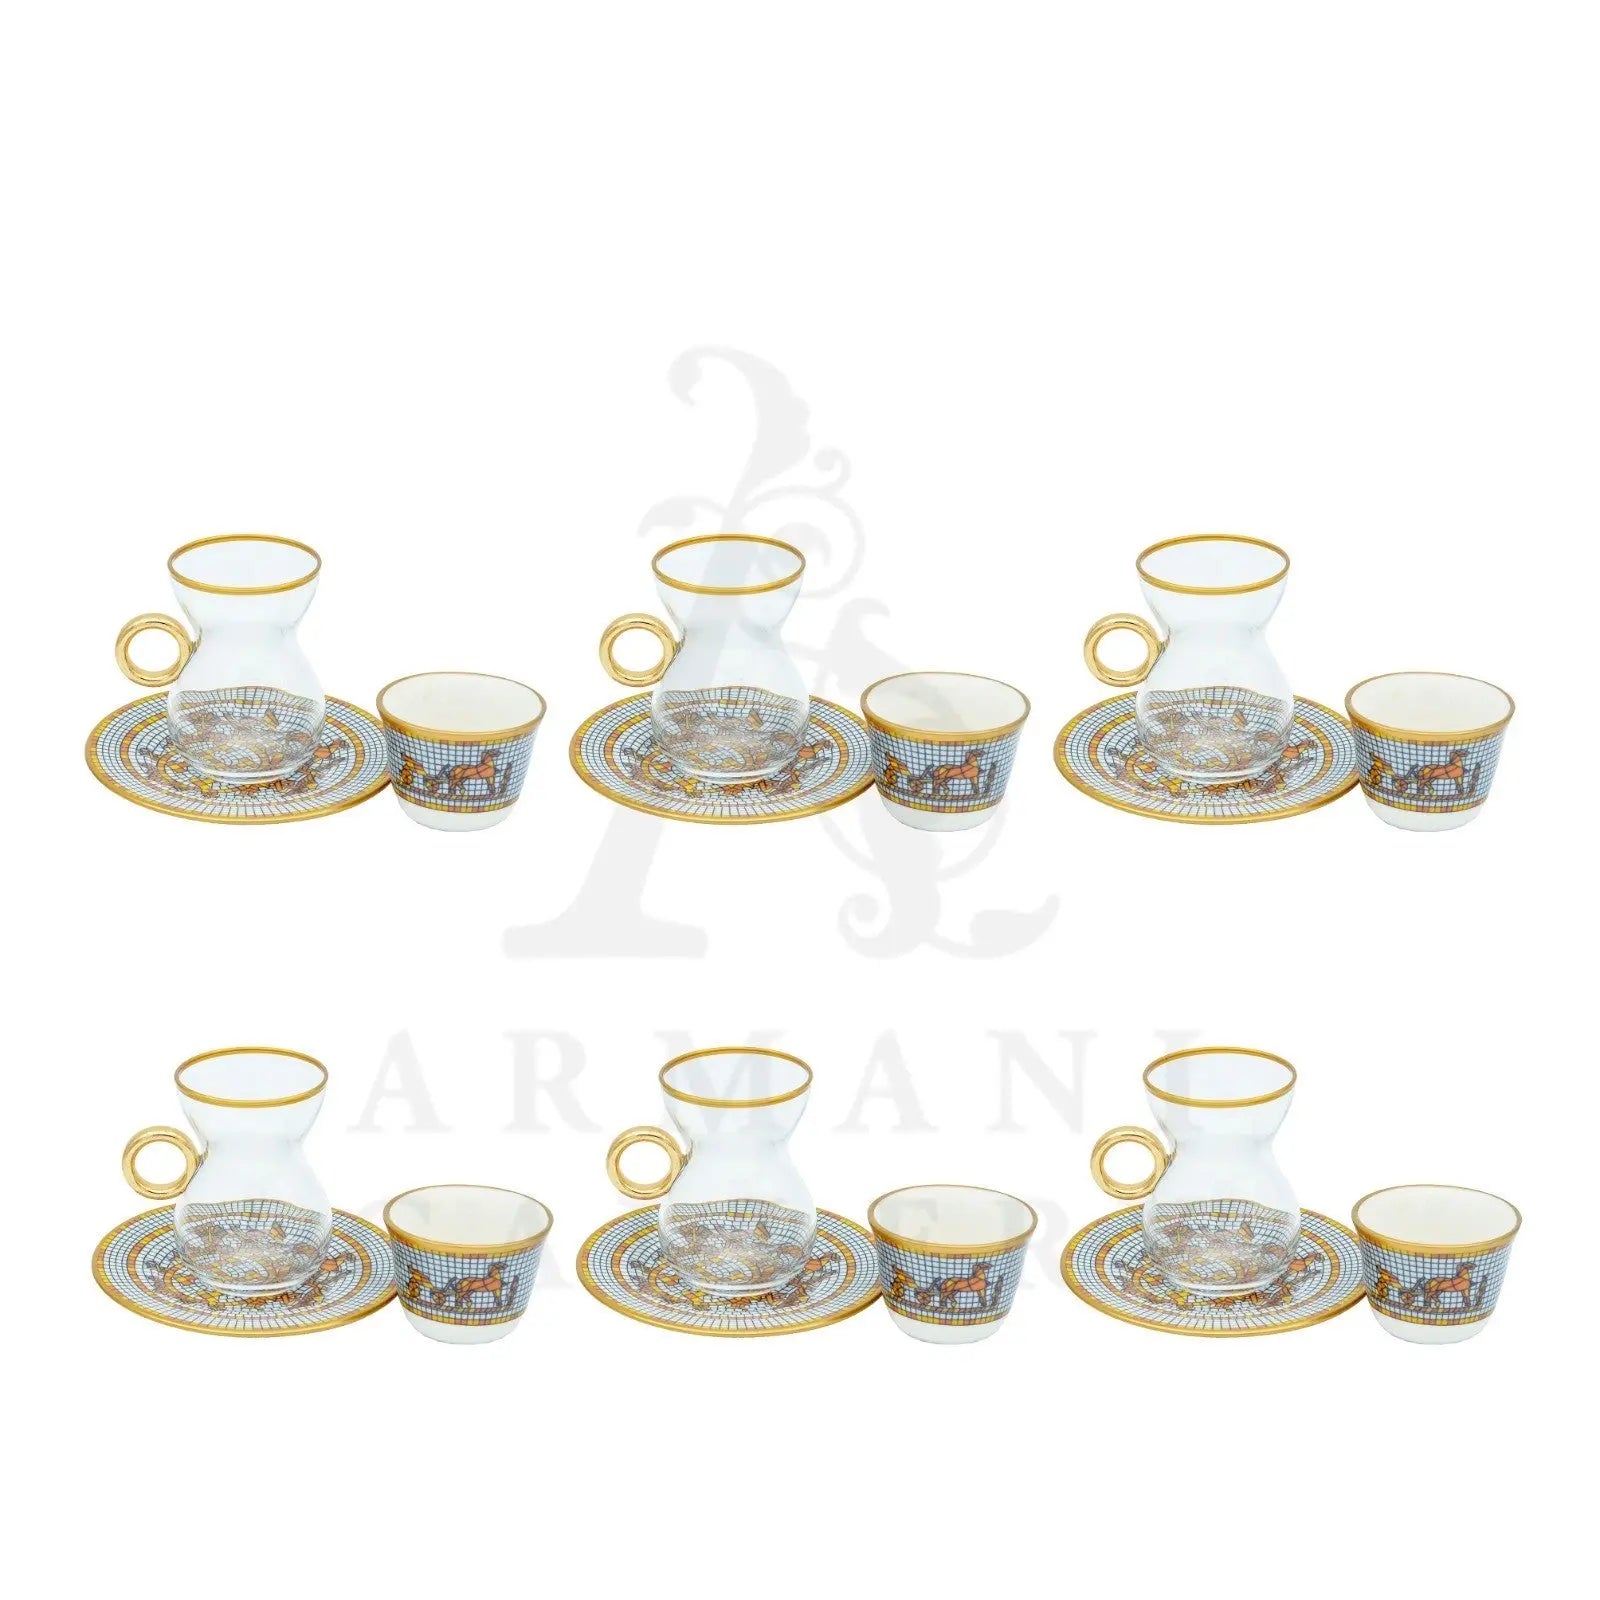 Turkish Coffee and Tea Set Hermes Horse Grey and Gold 18 Pcs - Armani Gallery